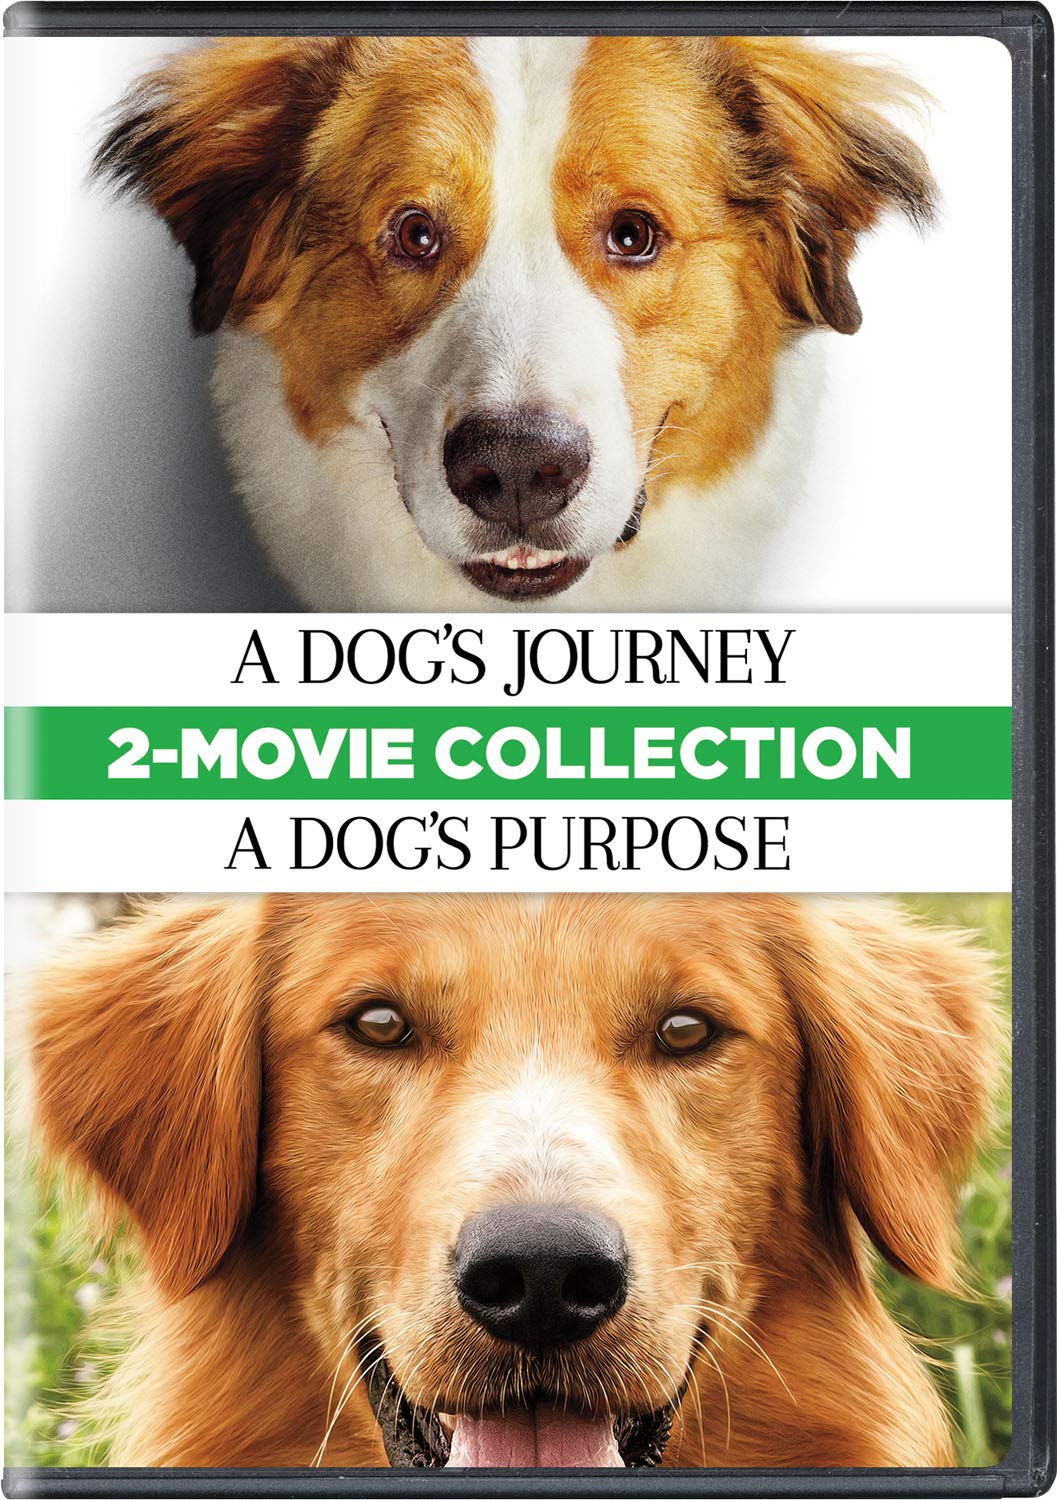 A Dog's Purpose/A Dog's Journey (DVD Double Feature) - DVD   - Drama Movies On DVD - Movies On GRUV